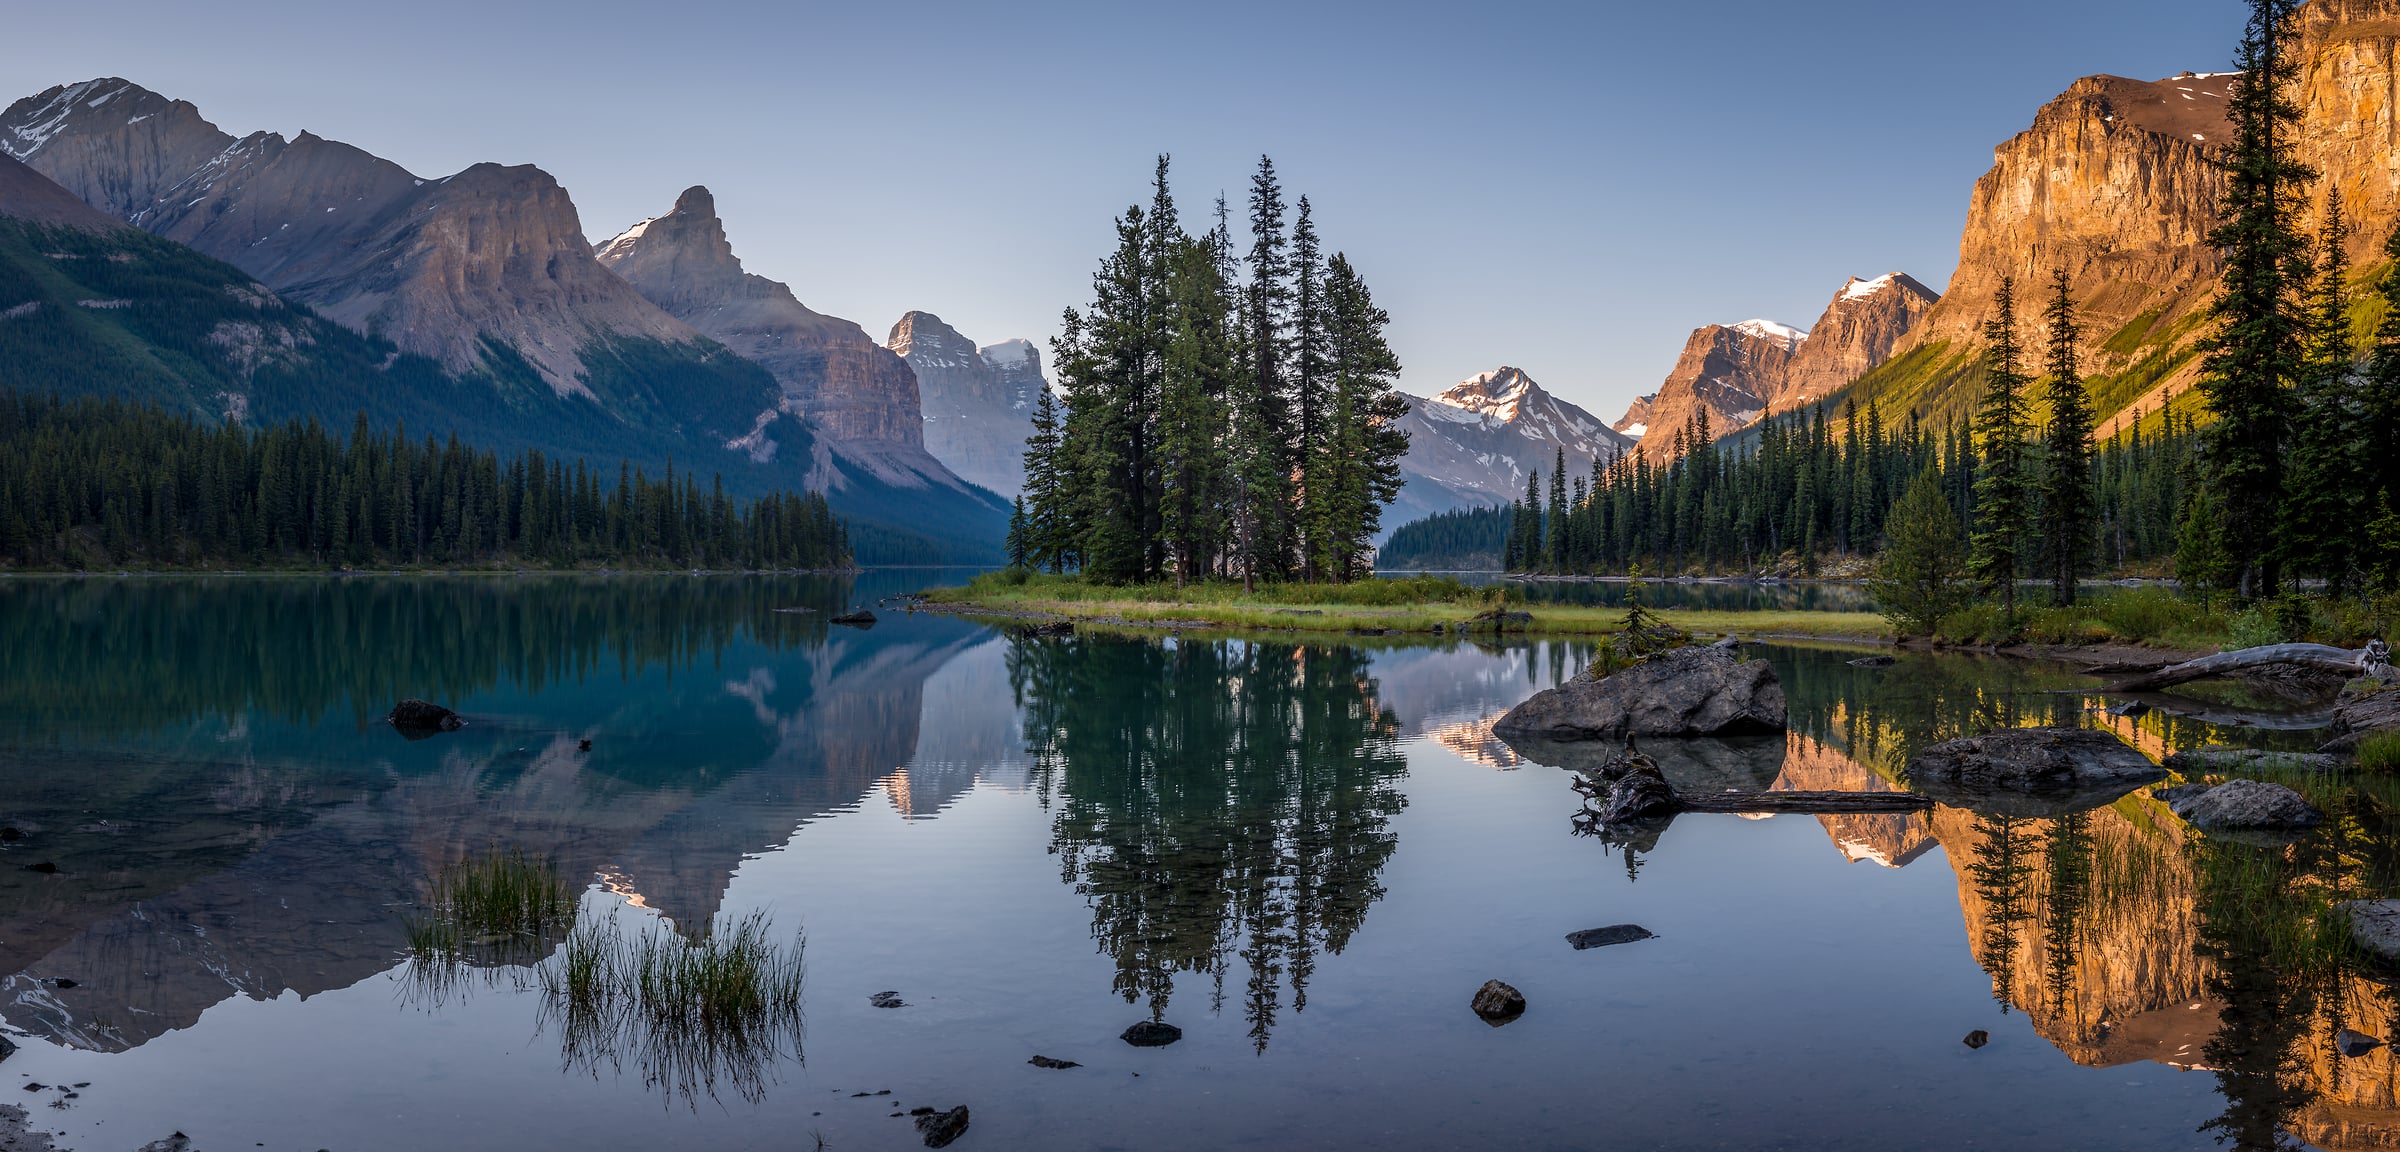 161 megapixels! A very high resolution, large-format VAST photo print of Maligne Lake, Jasper National Park, Canada; nature landscape photo created by Tim Shields.